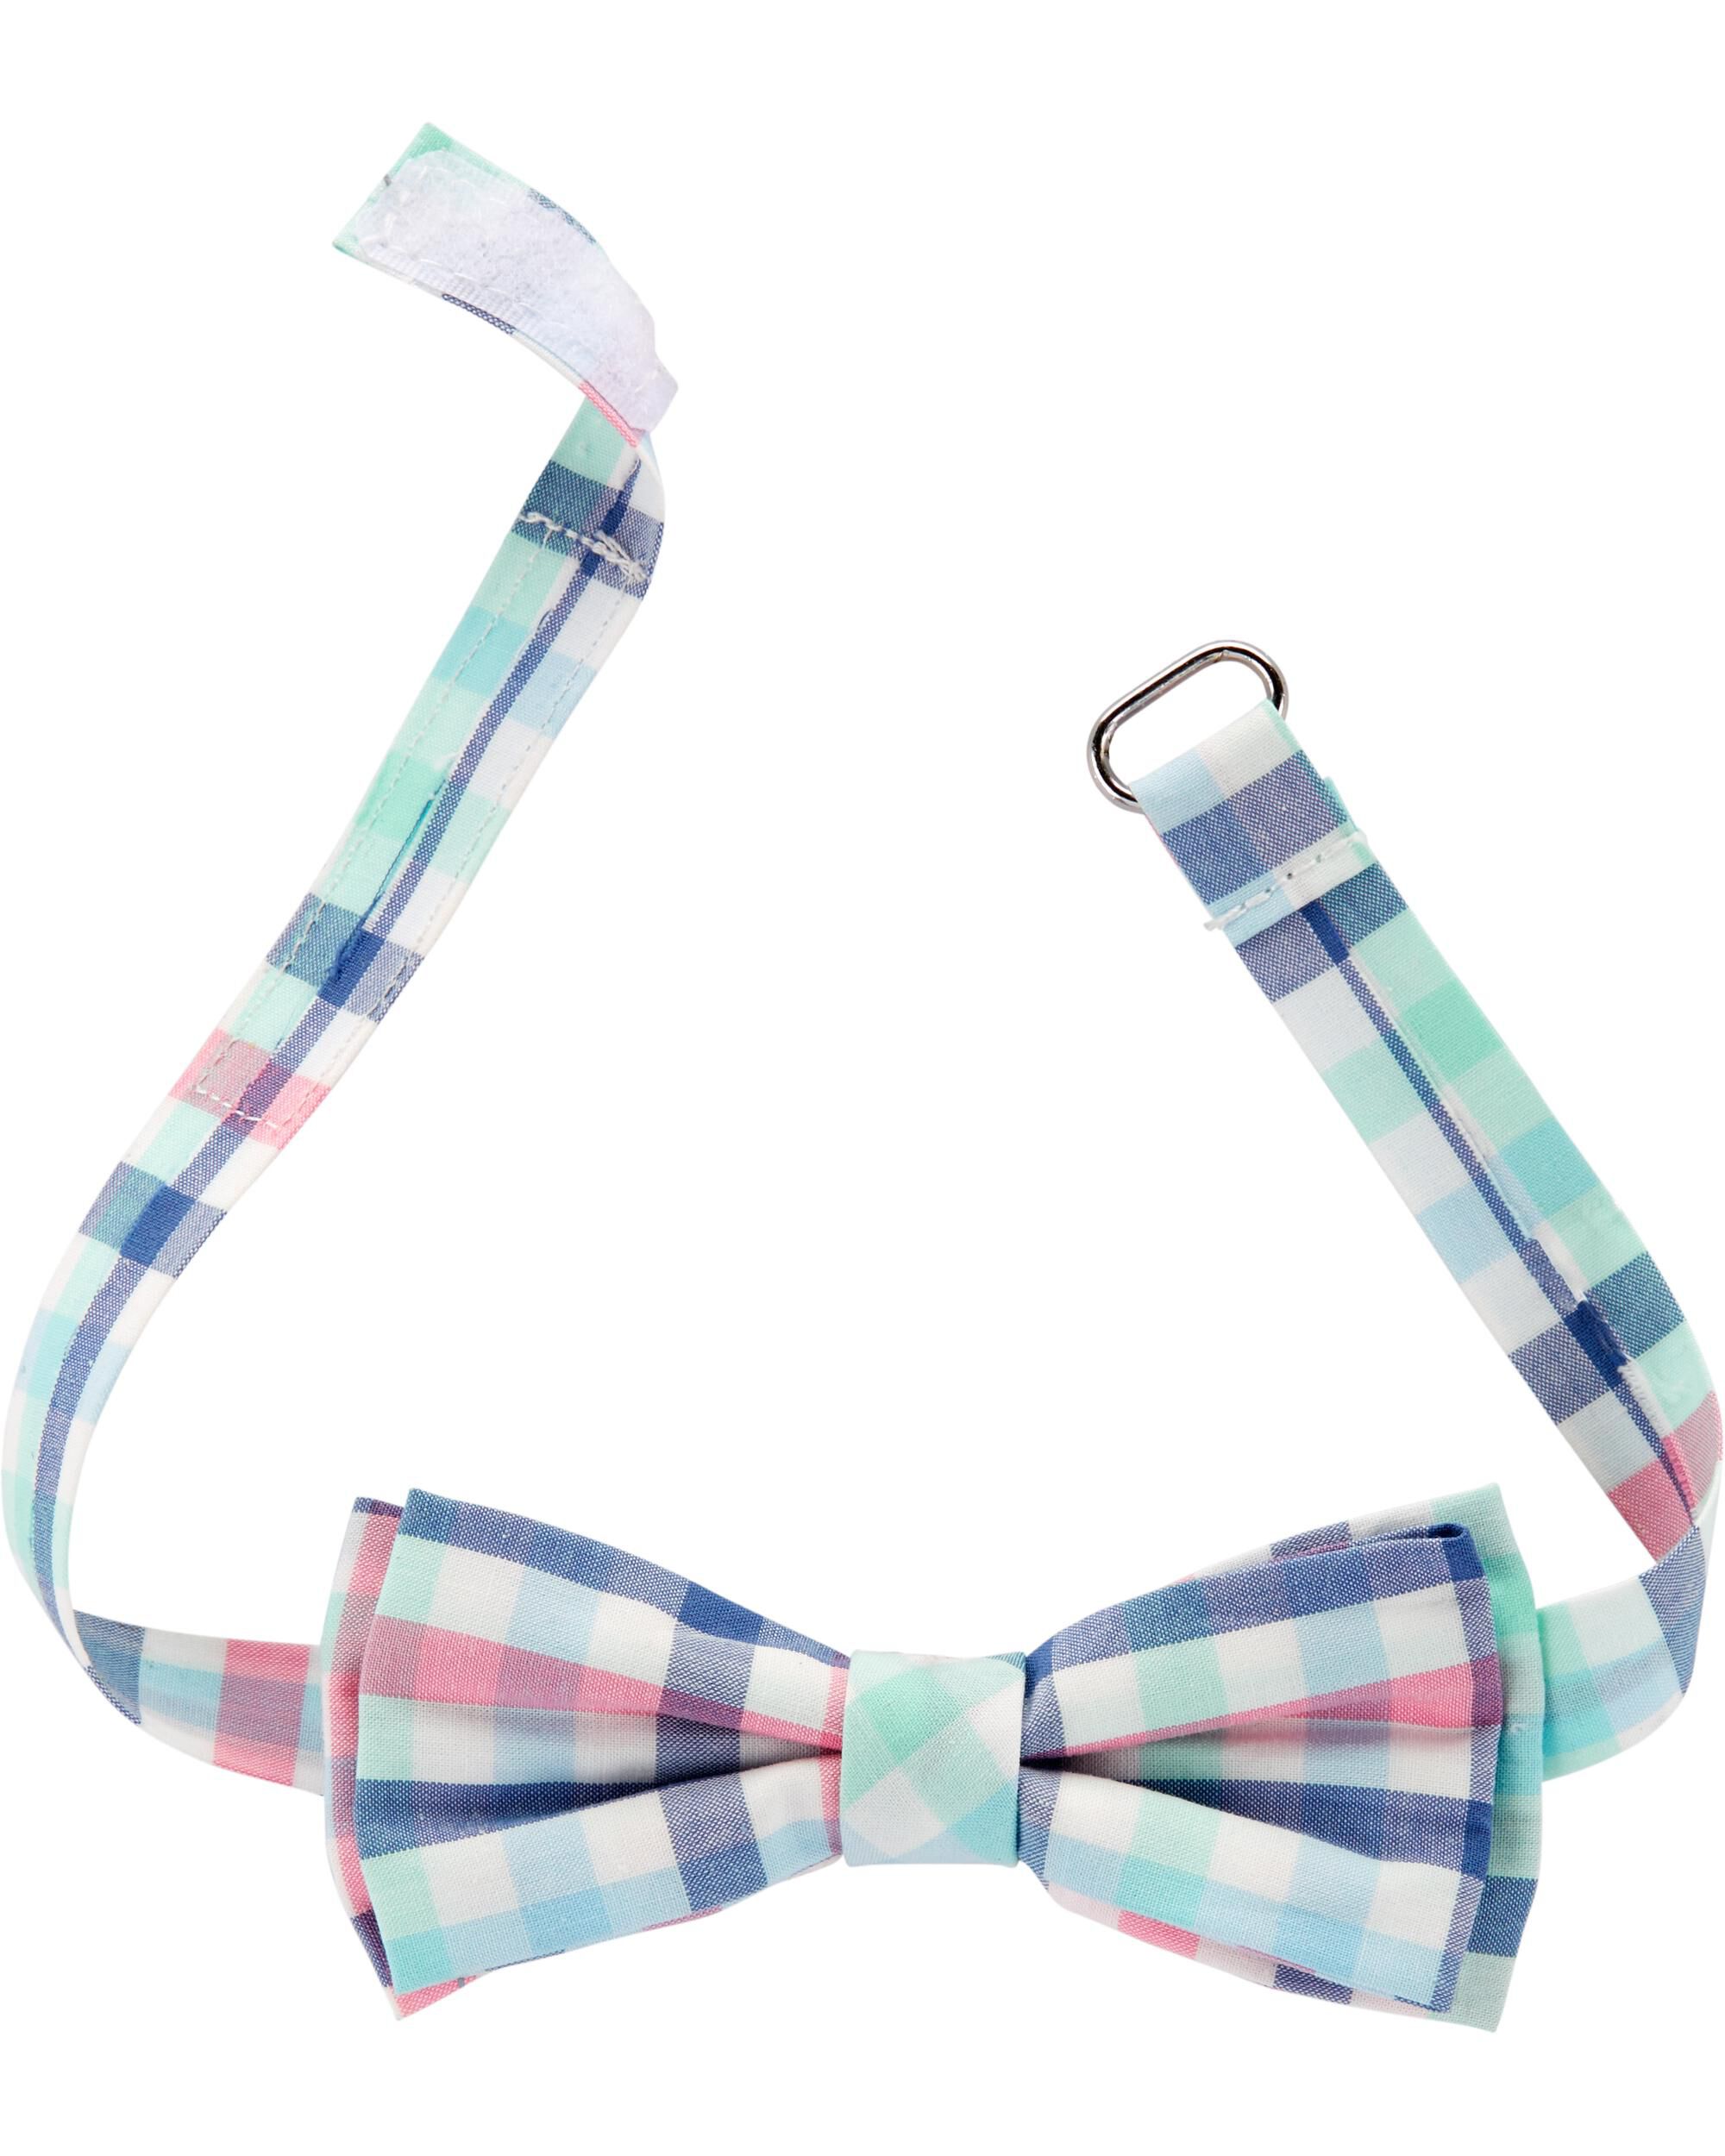 carter's bow tie outfit